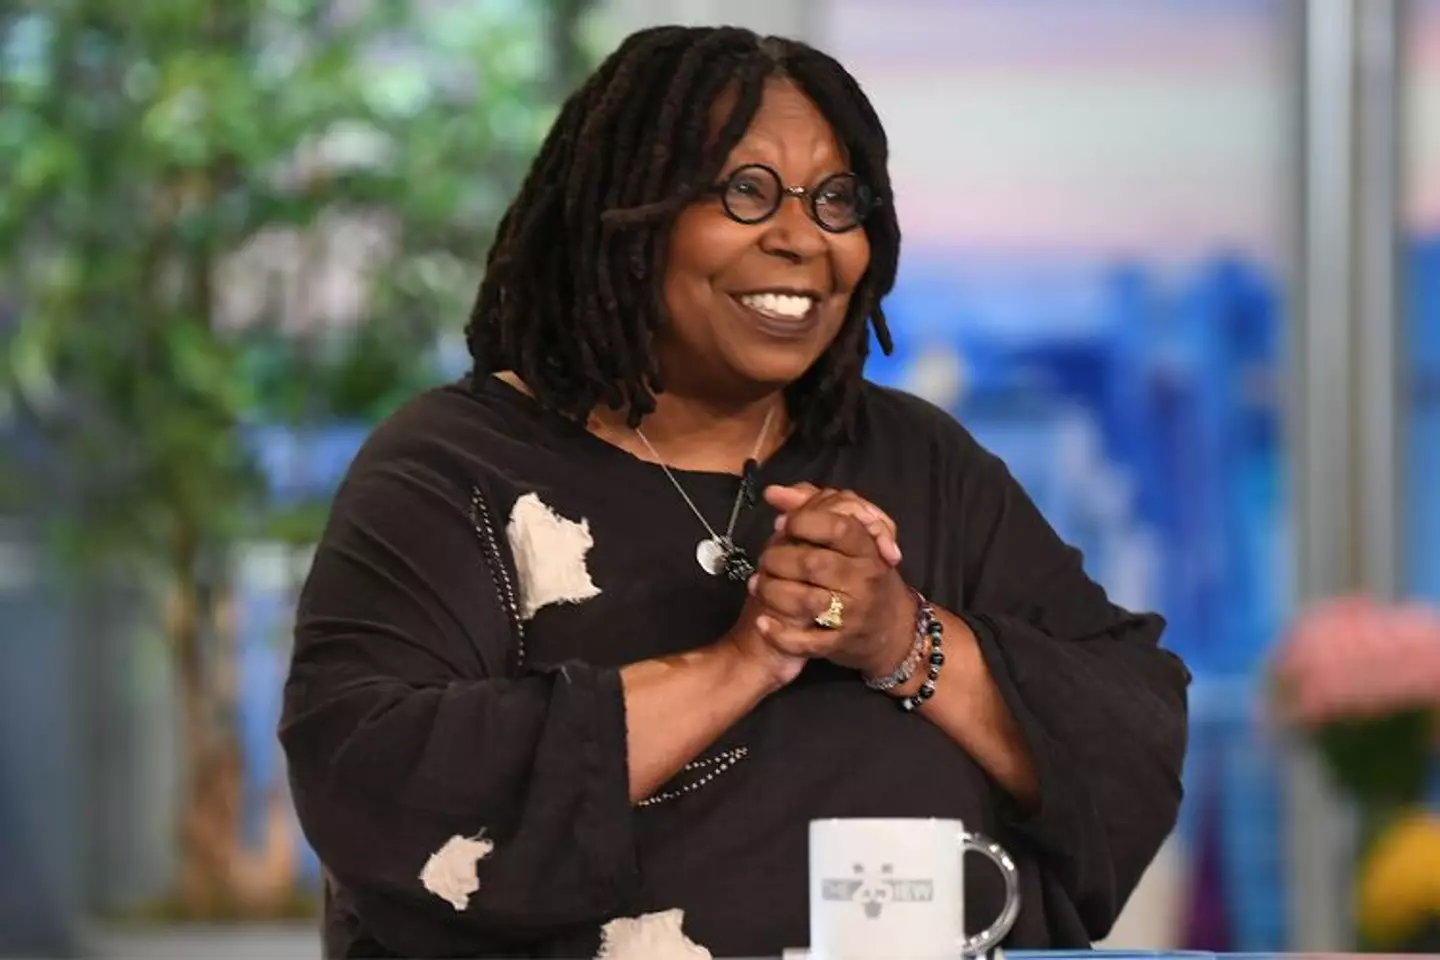 Whoopi Goldberg has been known for her opinions over the years.